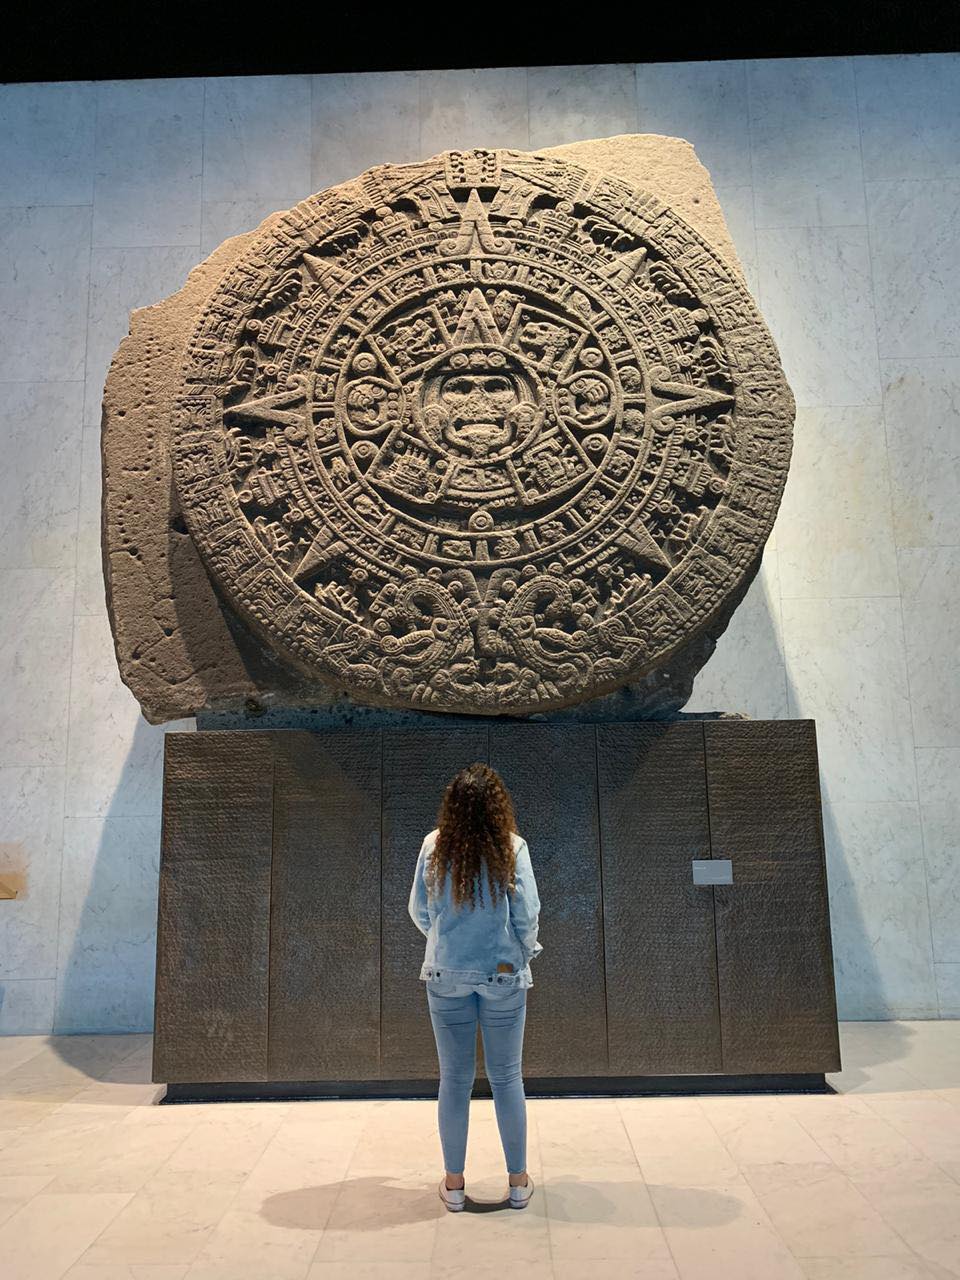 National Museum of Anthropology | GlobeQuest Blog